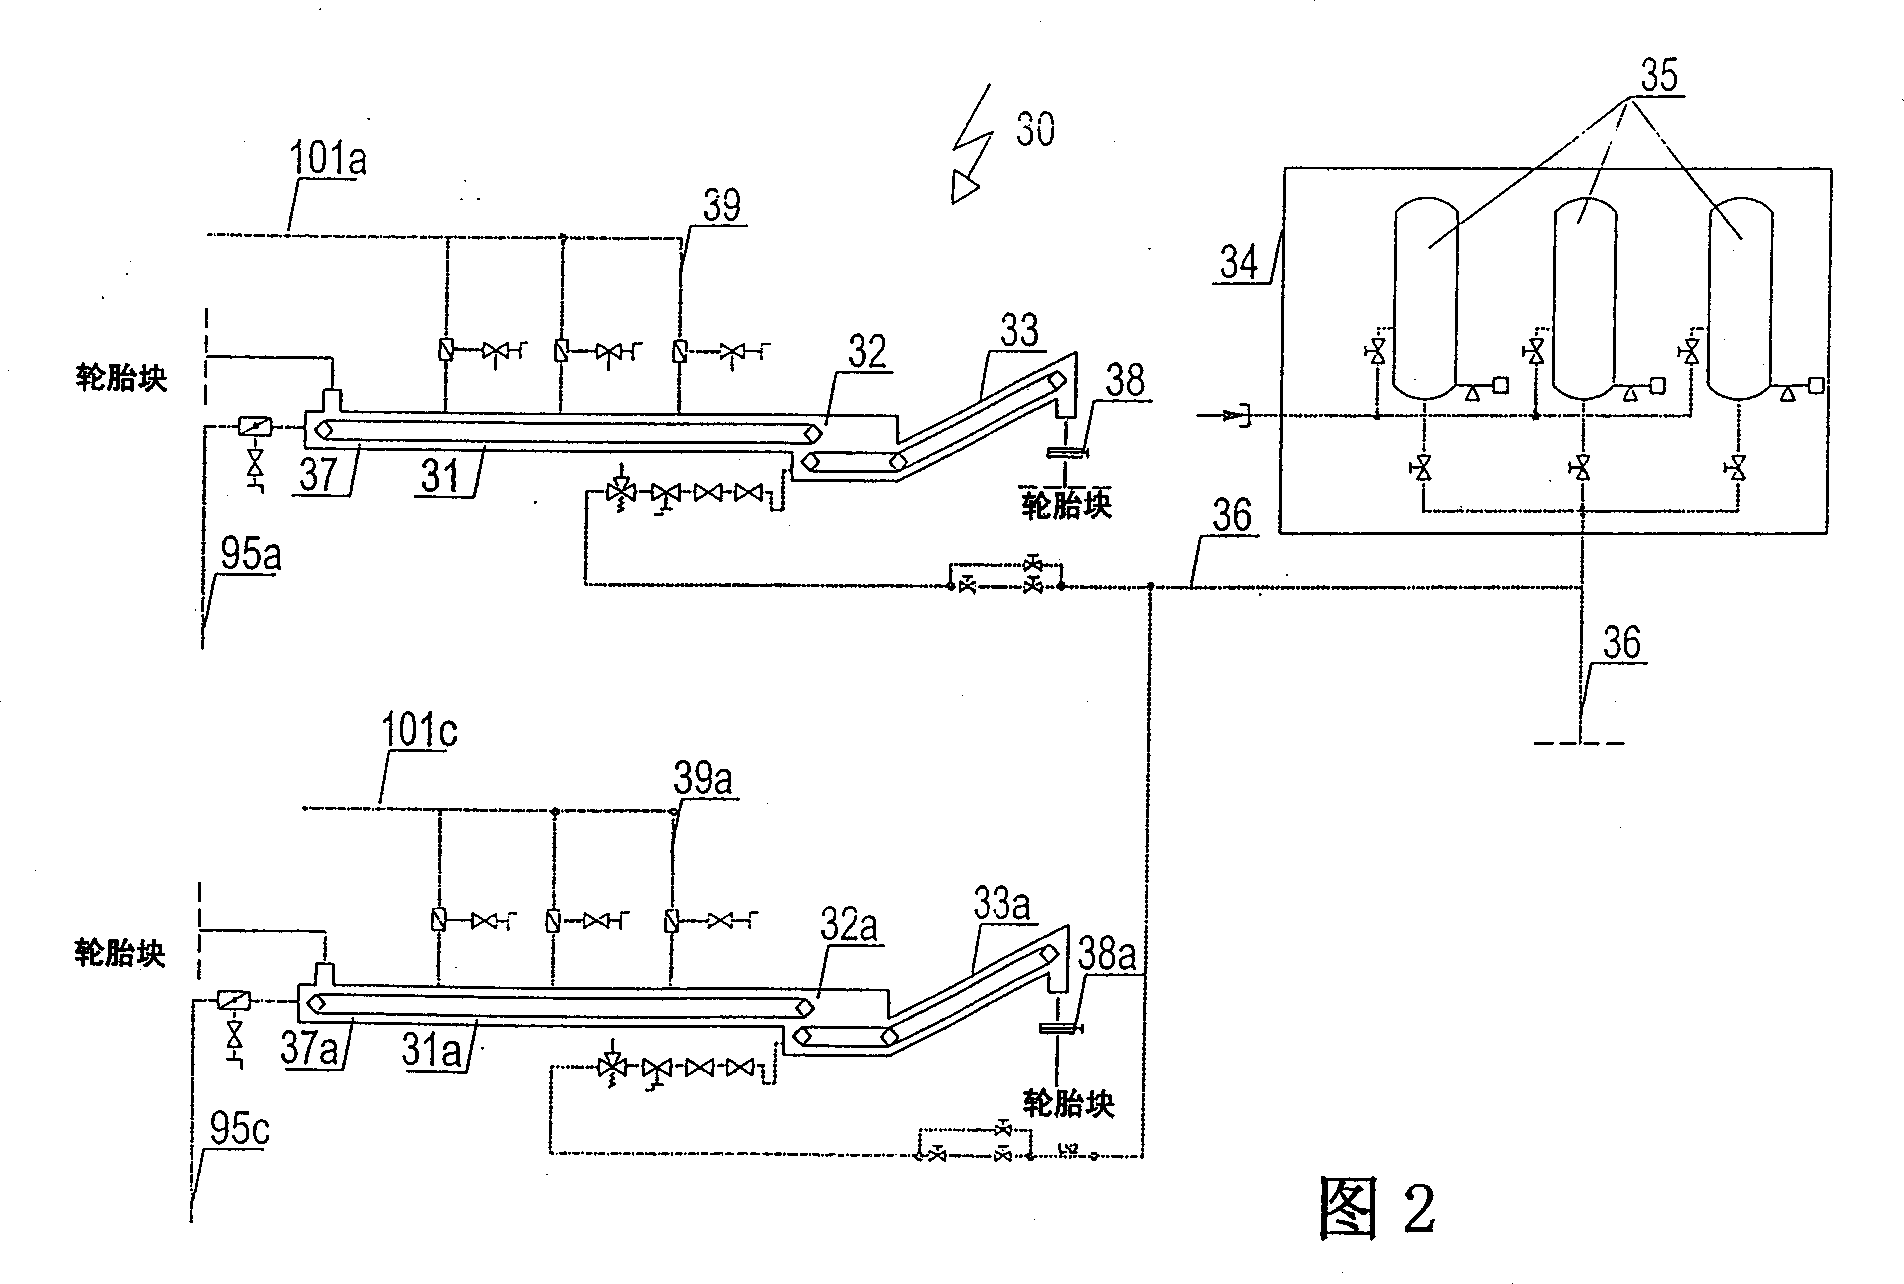 Apparatus for treating used tyre